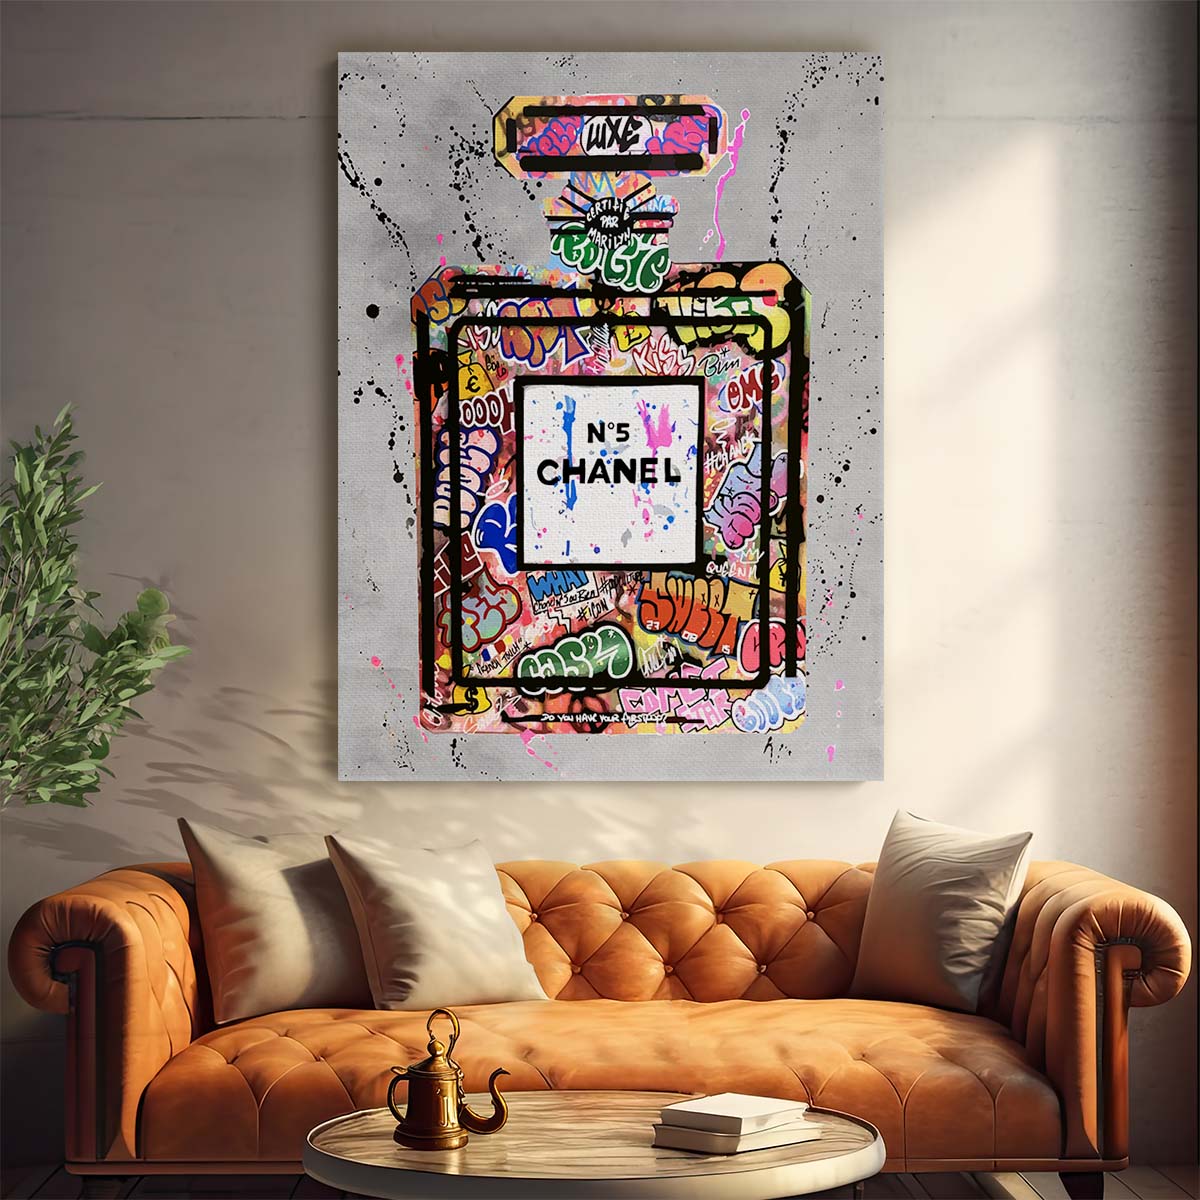 Coco Chanel N5 Perfume Graffiti Wall Art by Luxuriance Designs. Made in USA.